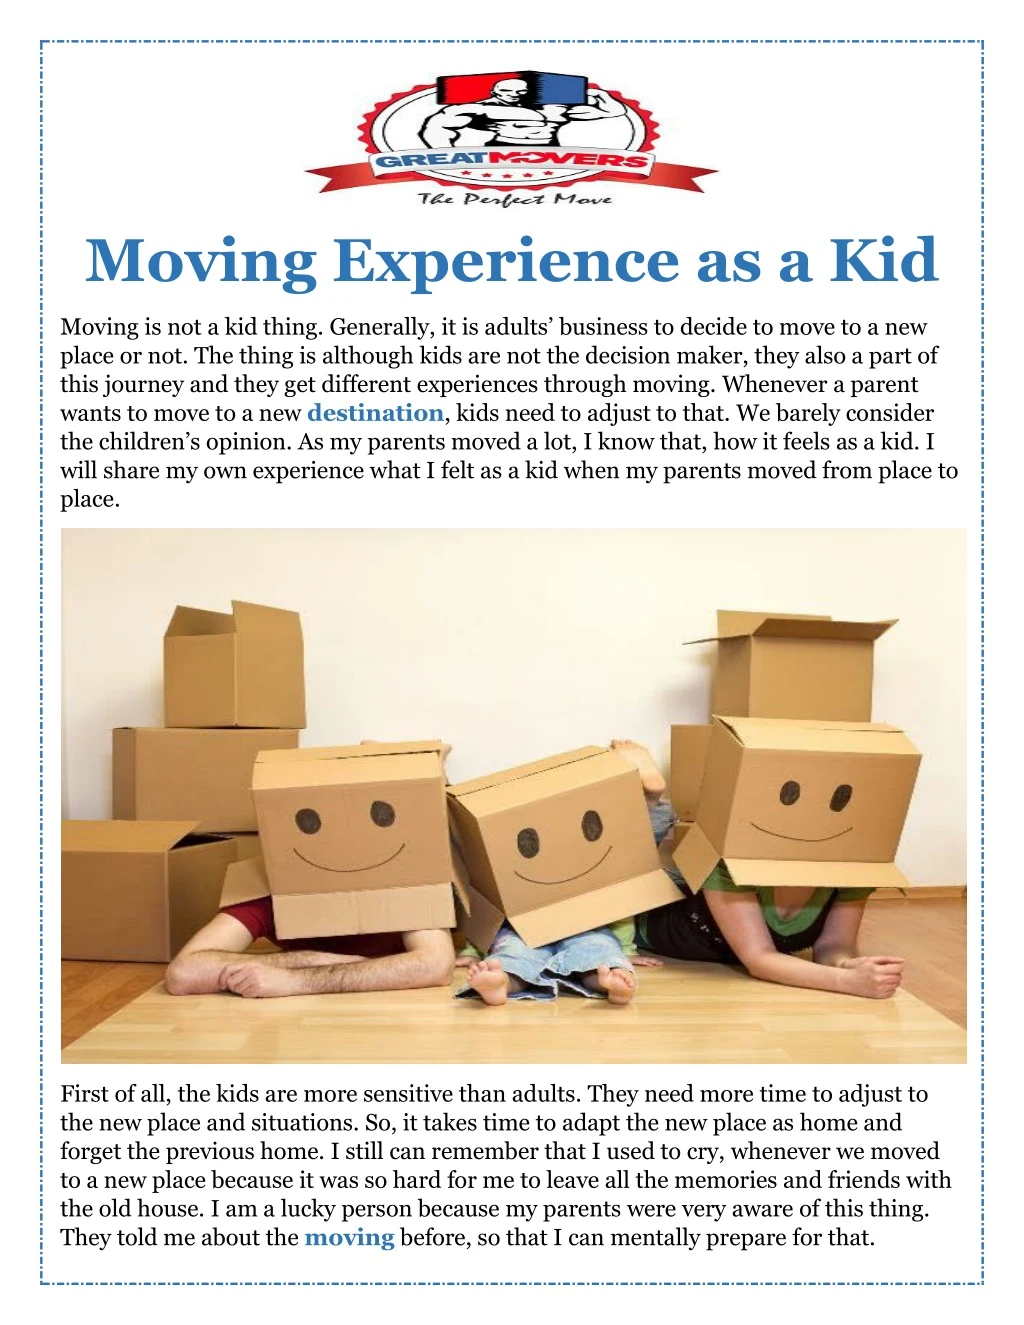 moving experience as a kid